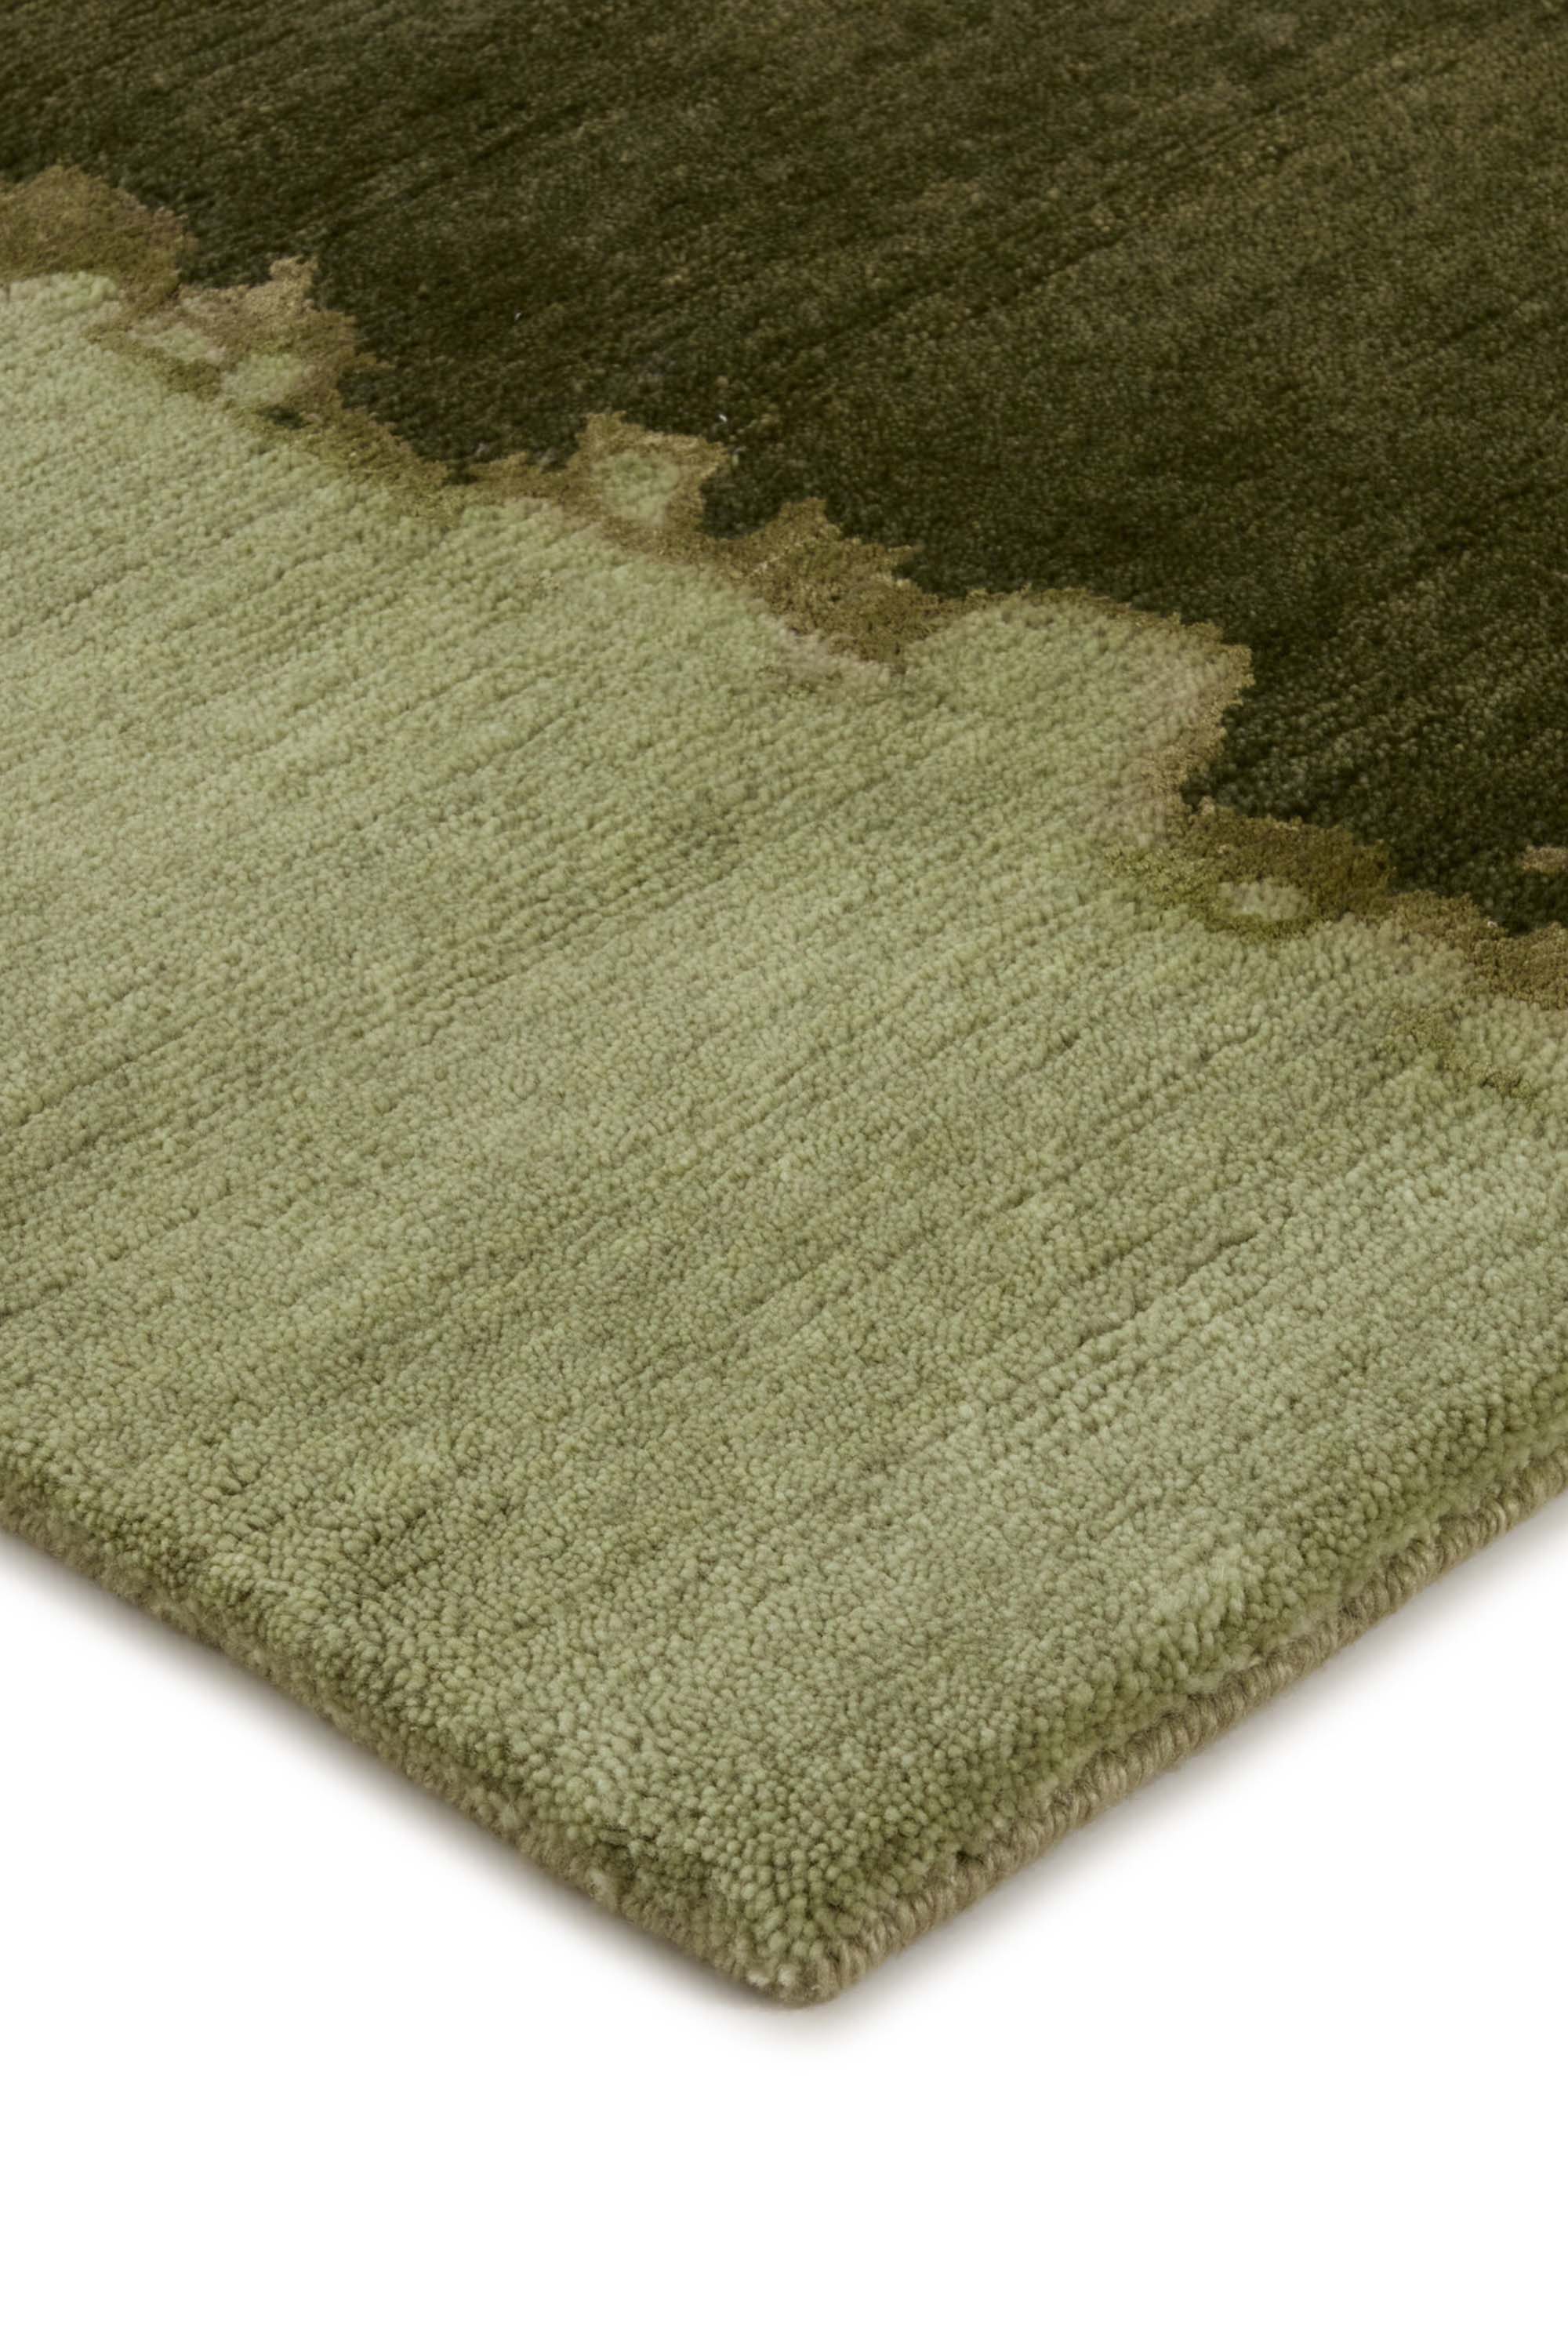 Luxury modern abstract rug in green tones